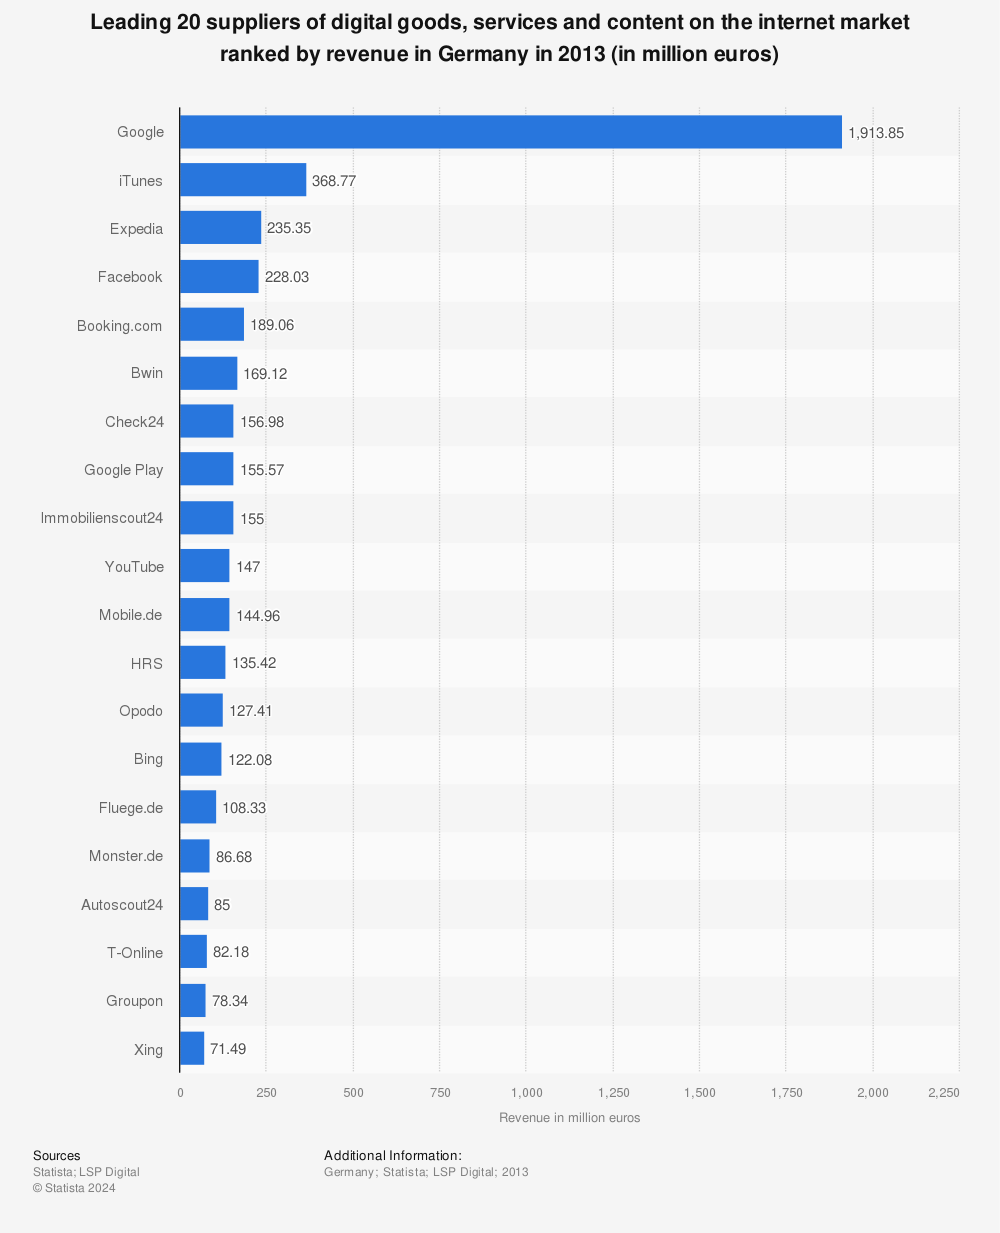 Statistic: Leading 20 suppliers of digital goods, services and content on the internet market ranked by revenue in Germany in 2013 (in million euros) | Statista